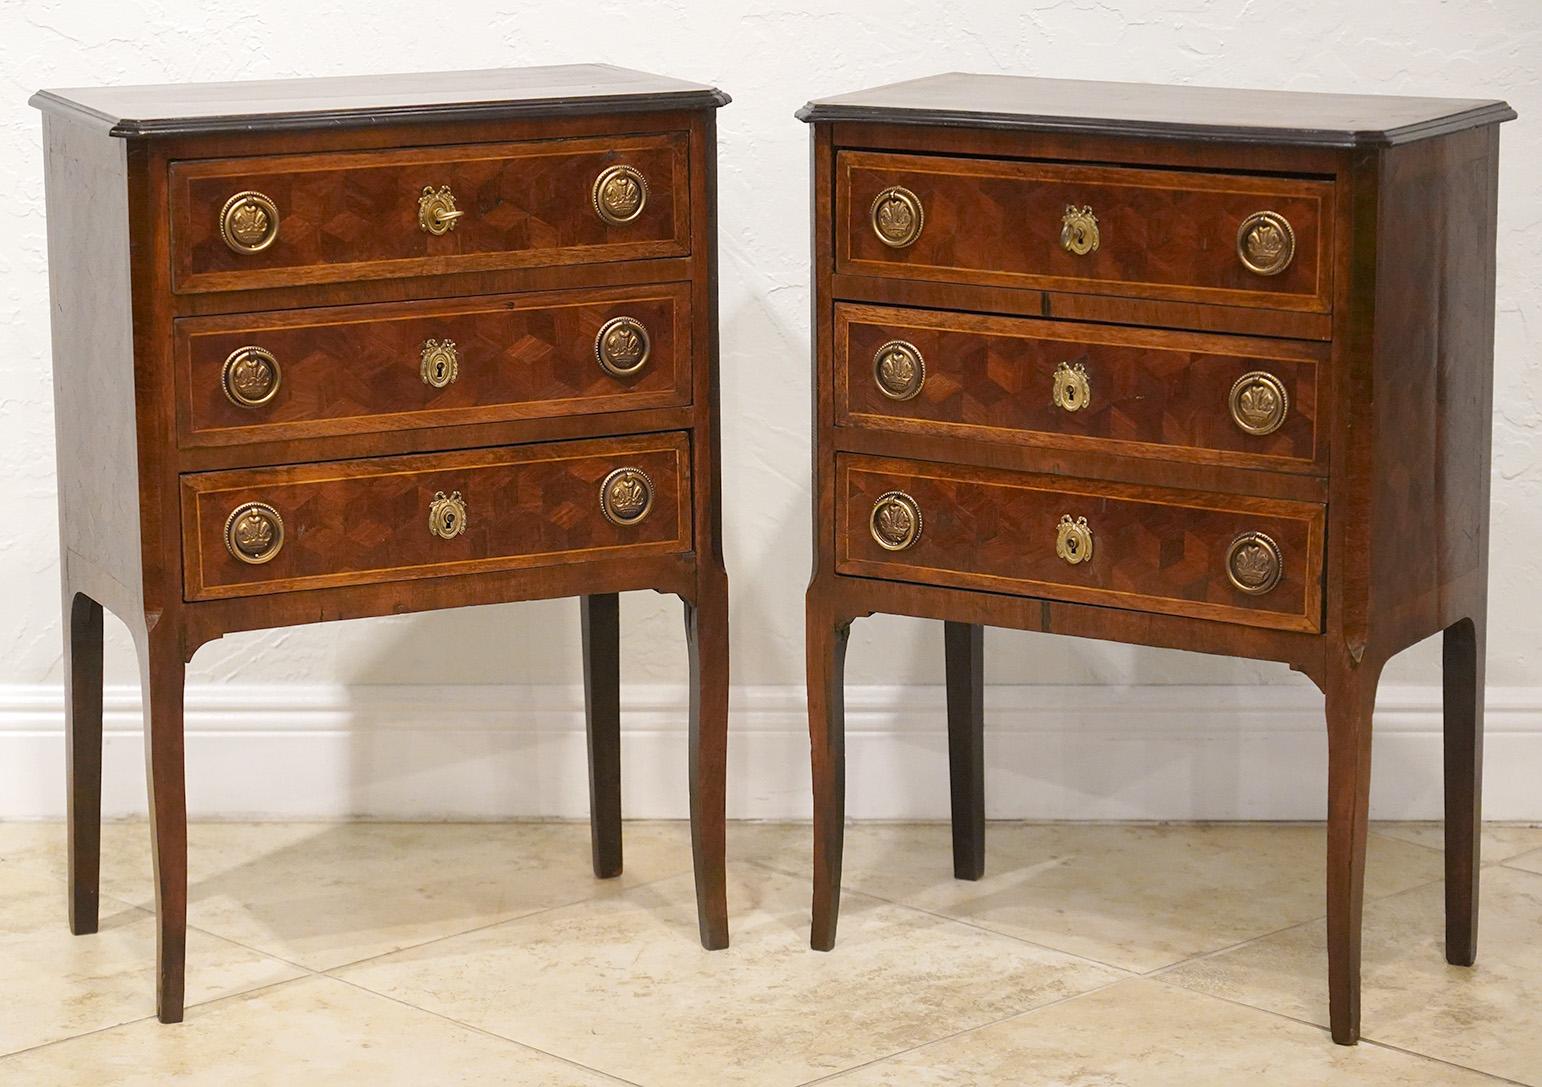 This pair of elegant French Louis XVI style parquetry commodes dating to the early 20th century feature banded inlaid tops with ebonized trim above three banded parquetry drawers and sides resting on slightly shaped tapering legs.